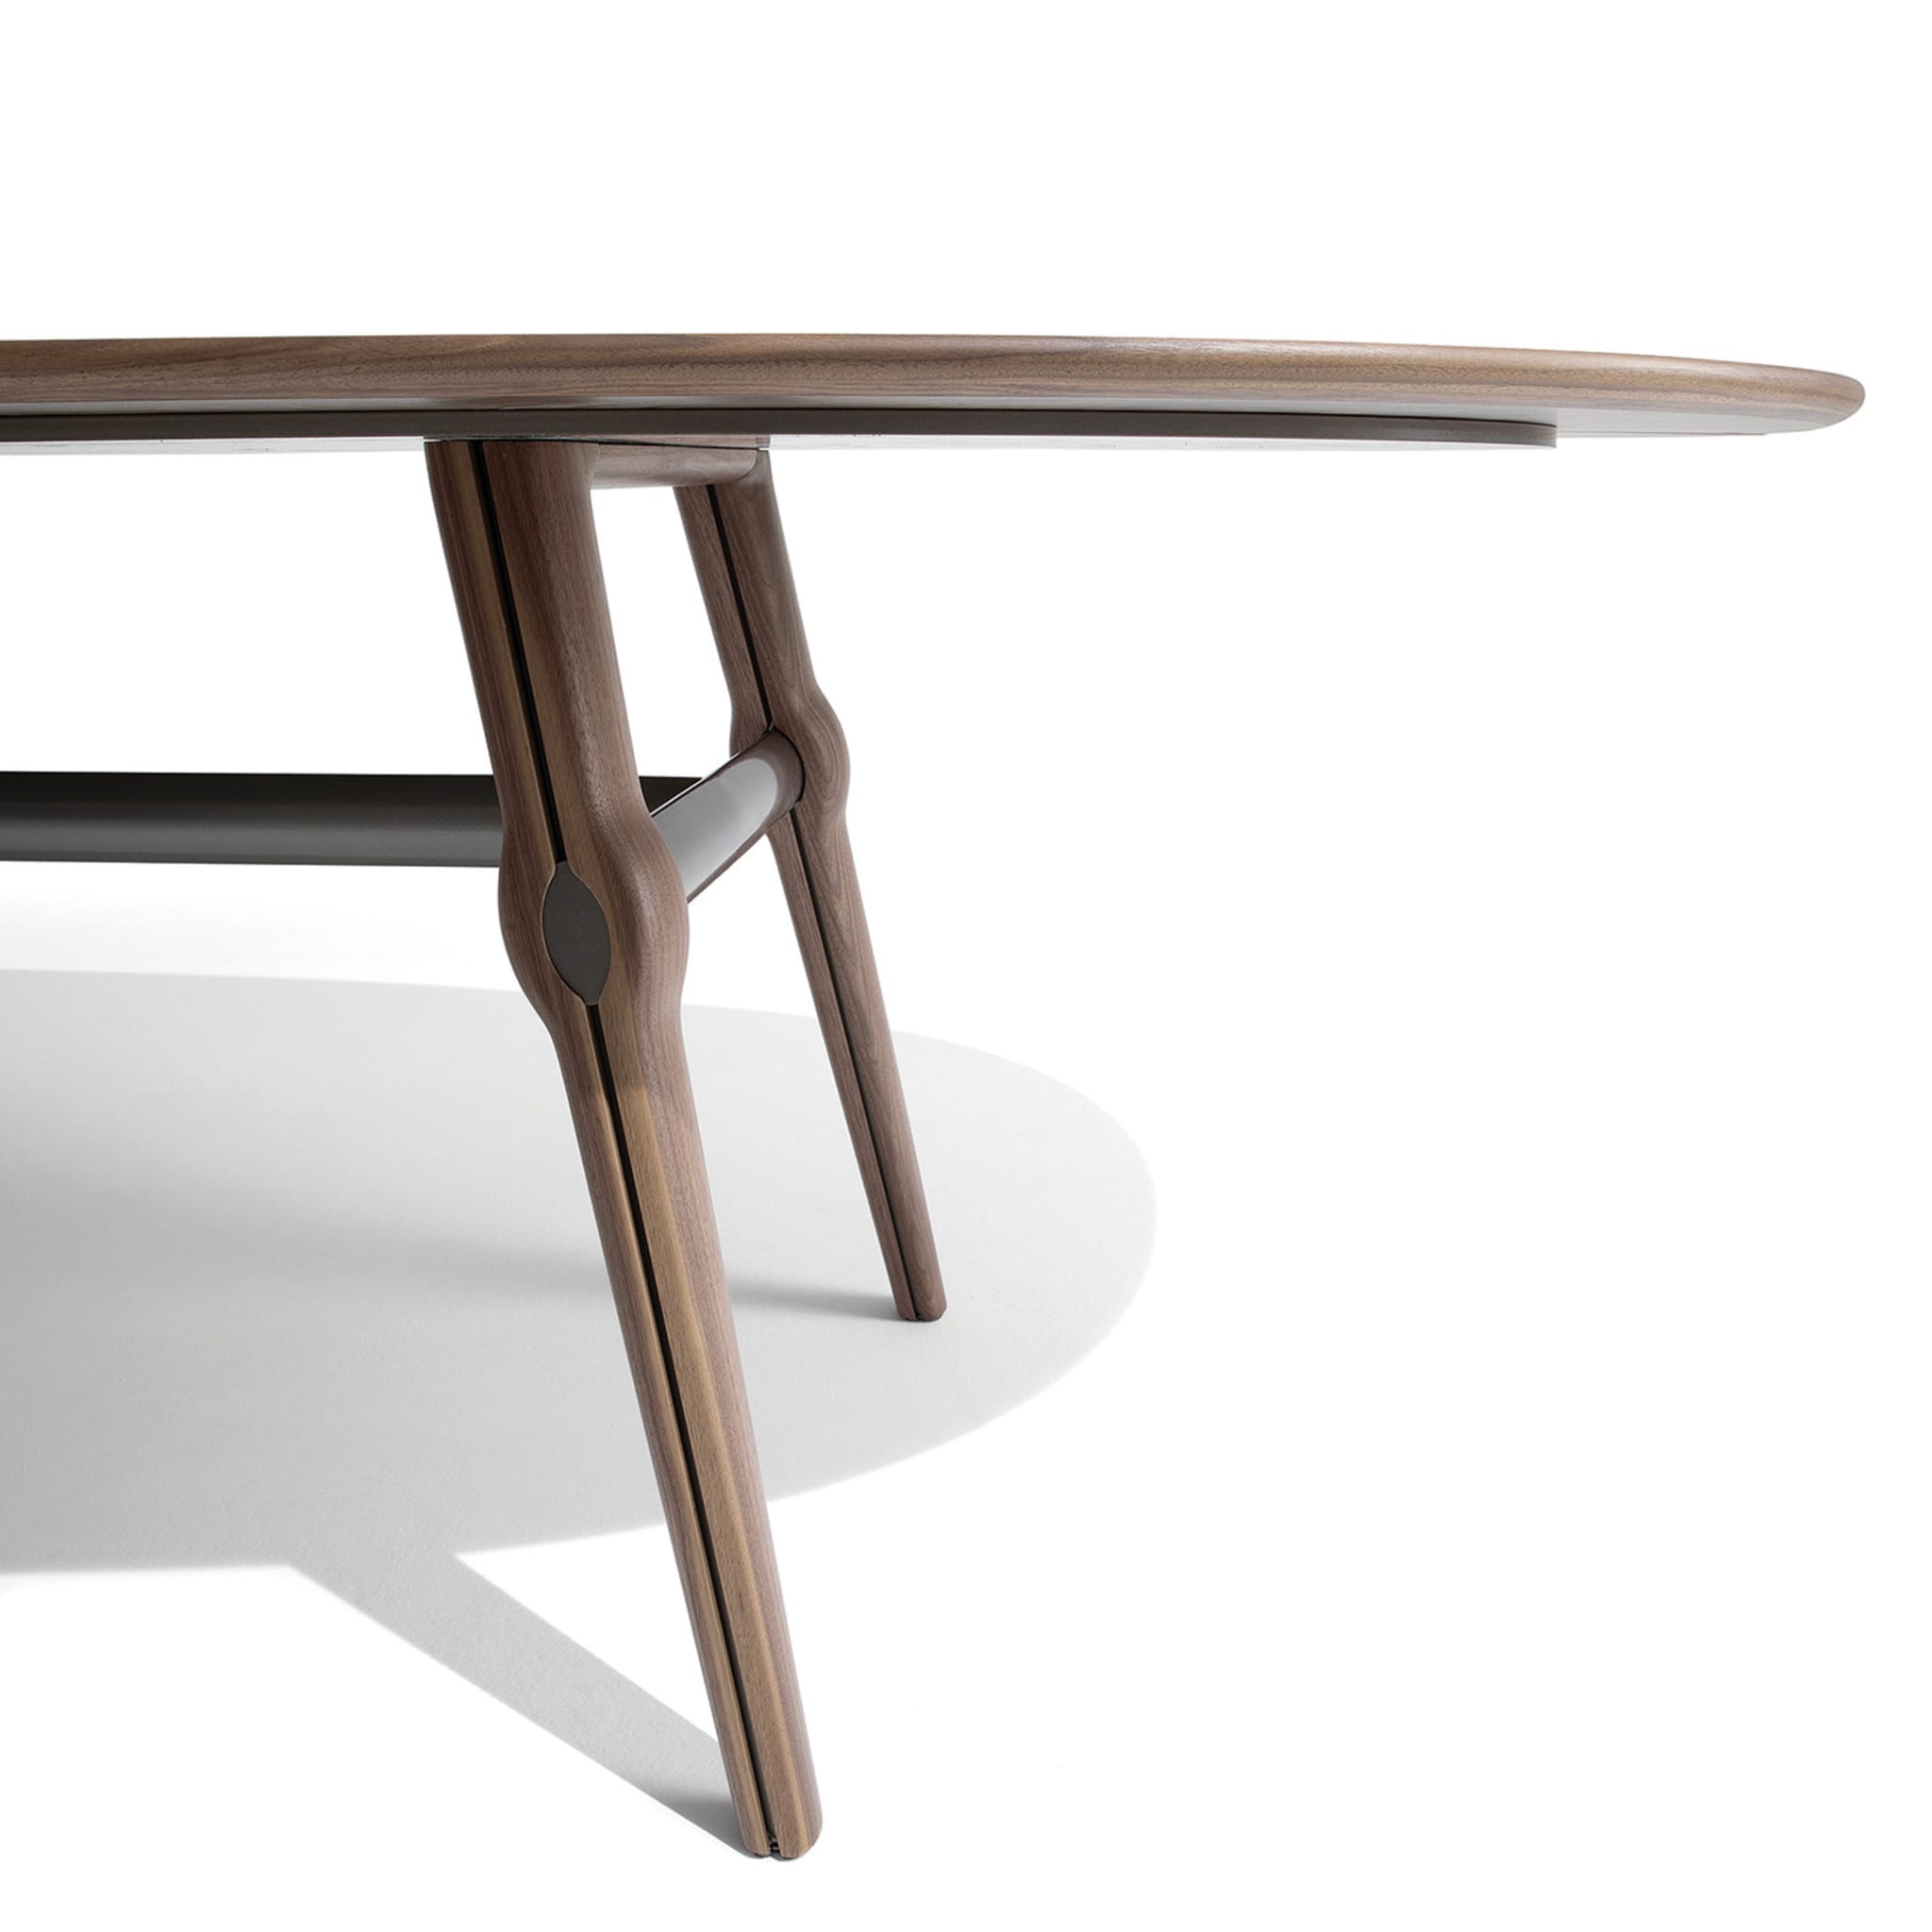 Ago Canaletto Walnut Dining Table - Alternative view 2